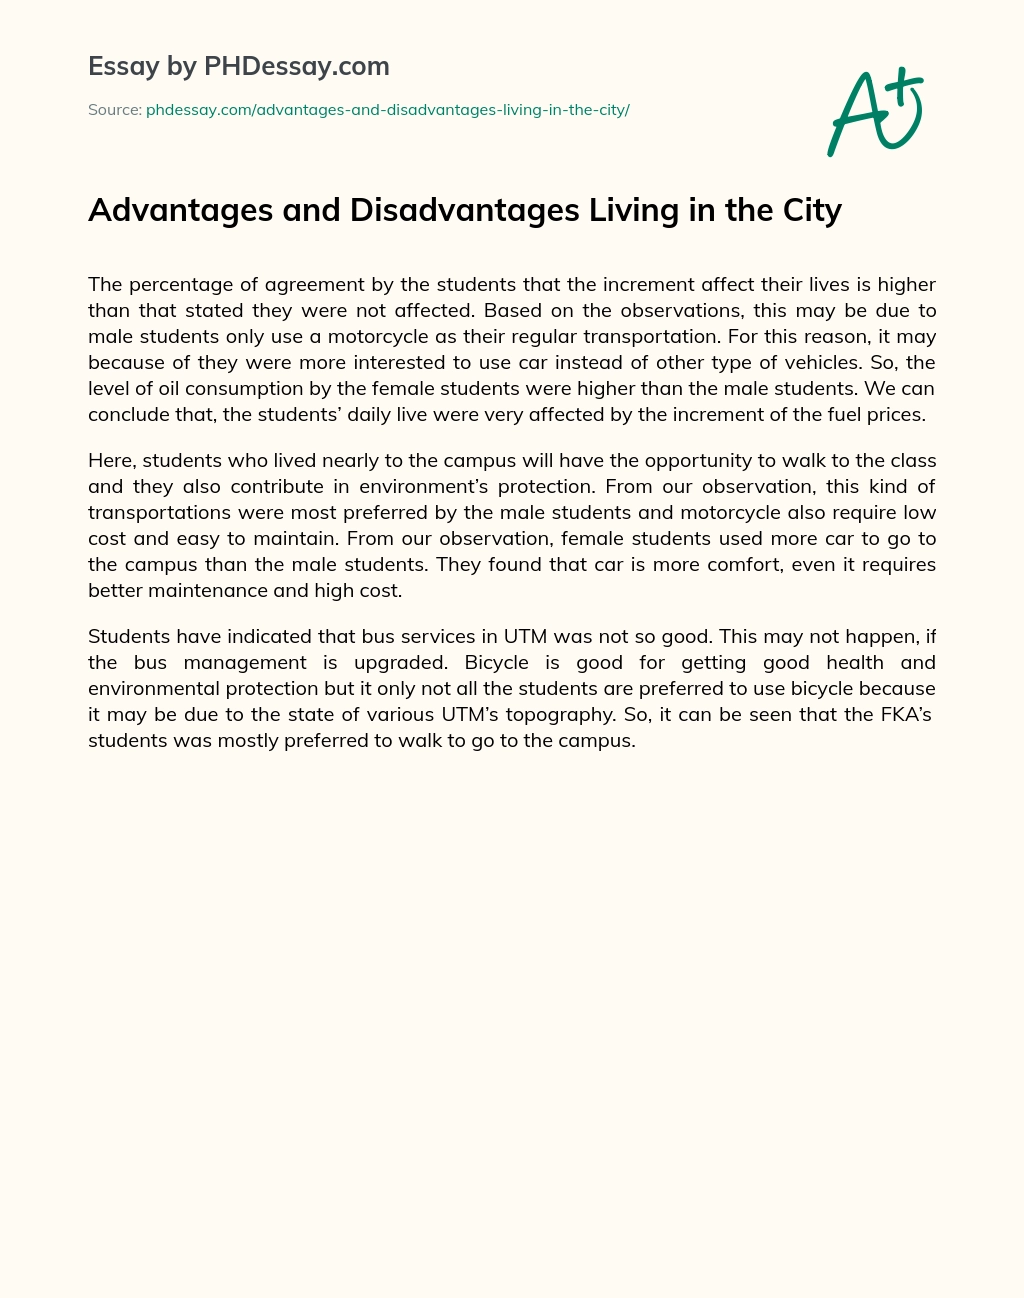 Advantages and Disadvantages Living in the City essay